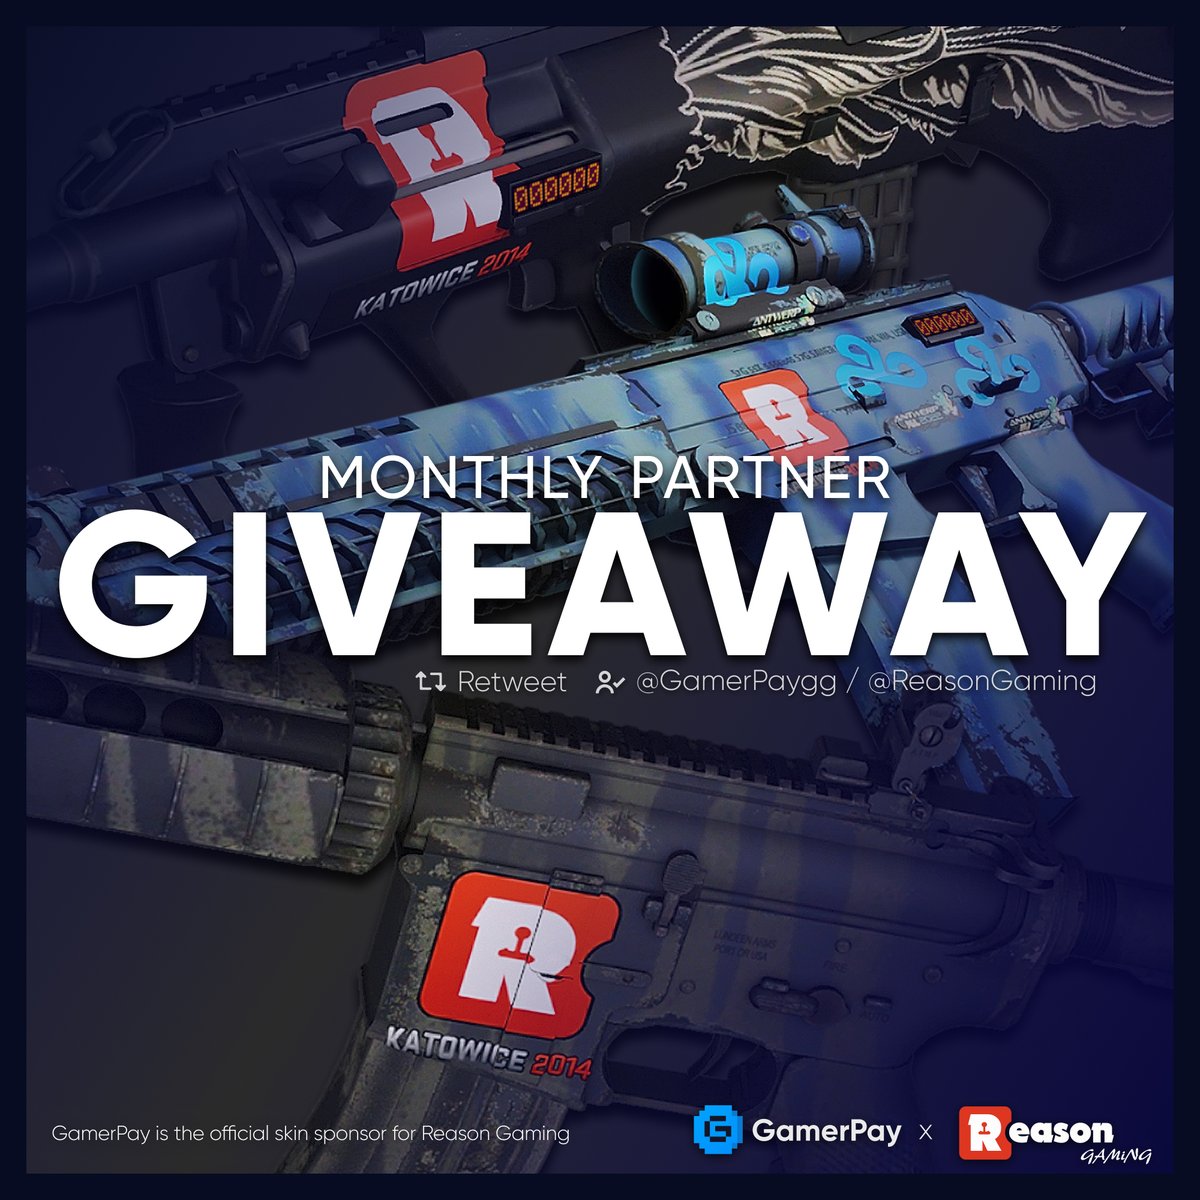 Our friends over at GamerPay just found 3 Reason crafts so we figured we’d give away to you guys!

These are the skins applied with a Reason paper sticker:
 

StatTrak™ SG 553 | Wave Spray

StatTrak™ AUG | Wings
M4A4 | Faded Zebra

Join the giveaway, simply:

Like and retweet…